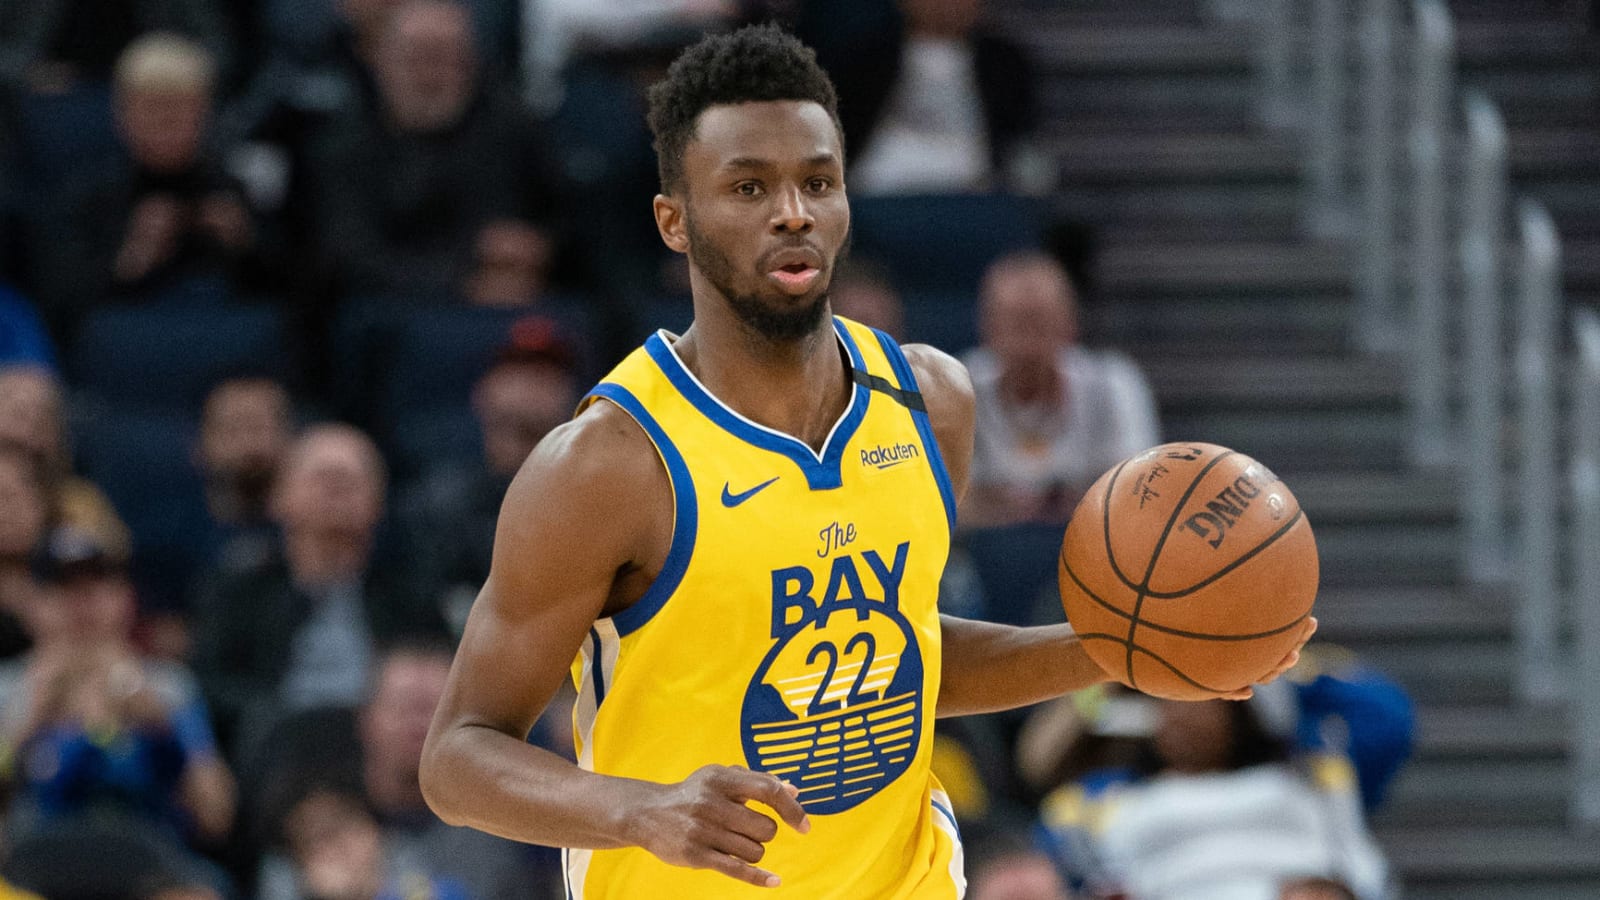 Andrew Wiggins has bulked up and put on muscle